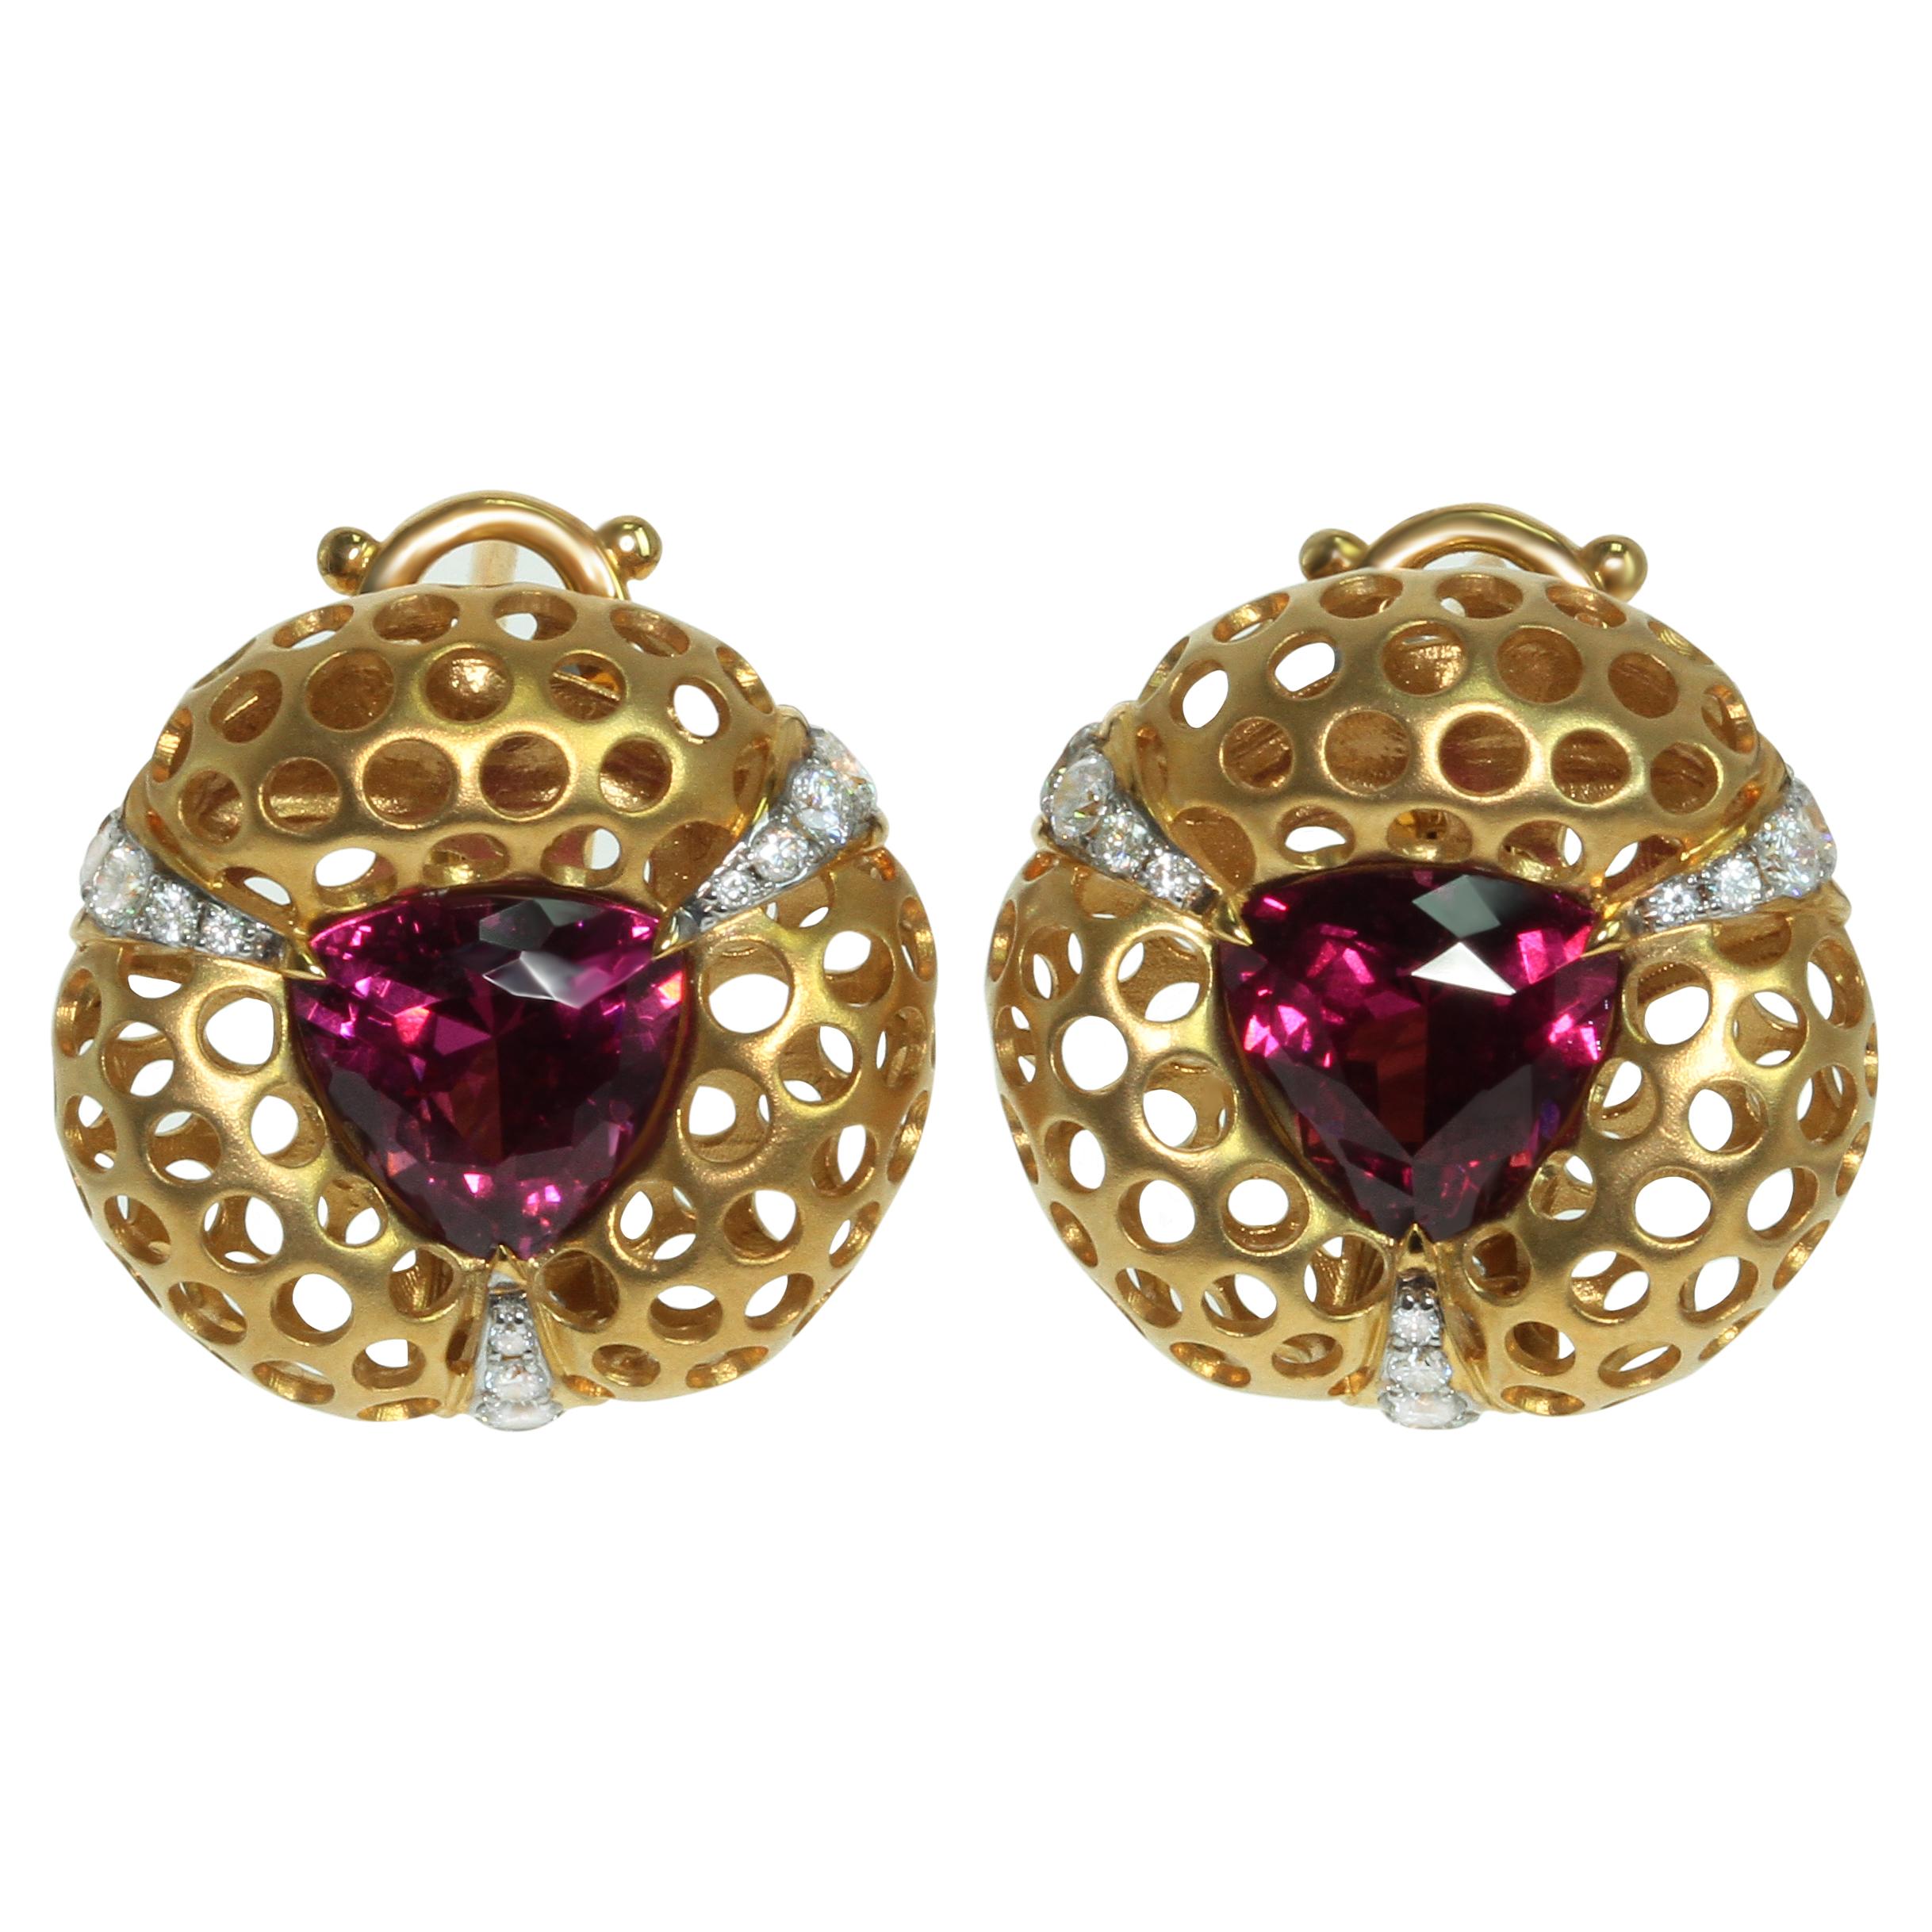 Rhodolite Garnet 4.03 Carat, Diamonds 18 Karat Yellow Gold Earrings
Have you ever seen swallow nests? It's many small holes in the cliffs. Our designers decided to embody this idea in these spectacular Earrings. 
Inside Matte 18K Yellow Gold are